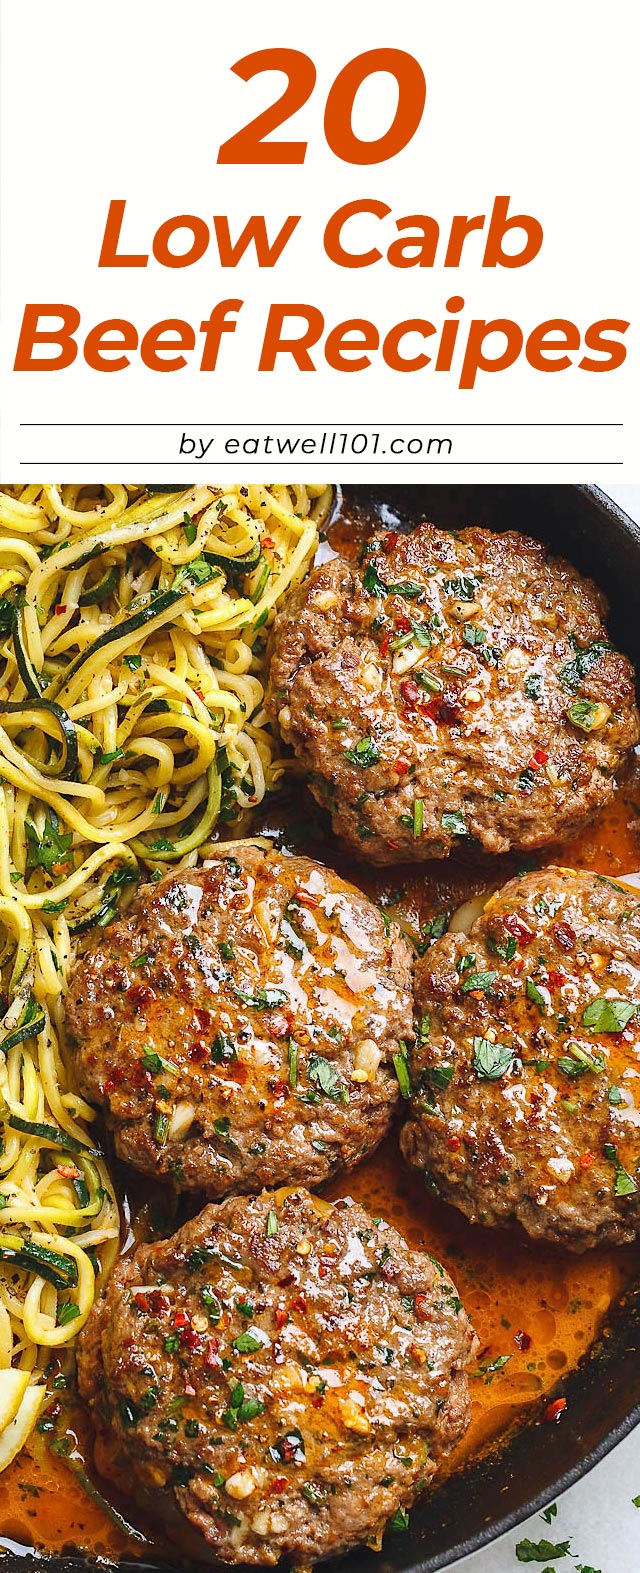 Low Carb Beef Recipes - #lowcarb #beef #steak #recipes #eatwell101 - Looking to feed your family fast? All our best low carb beef recipes are right here! 